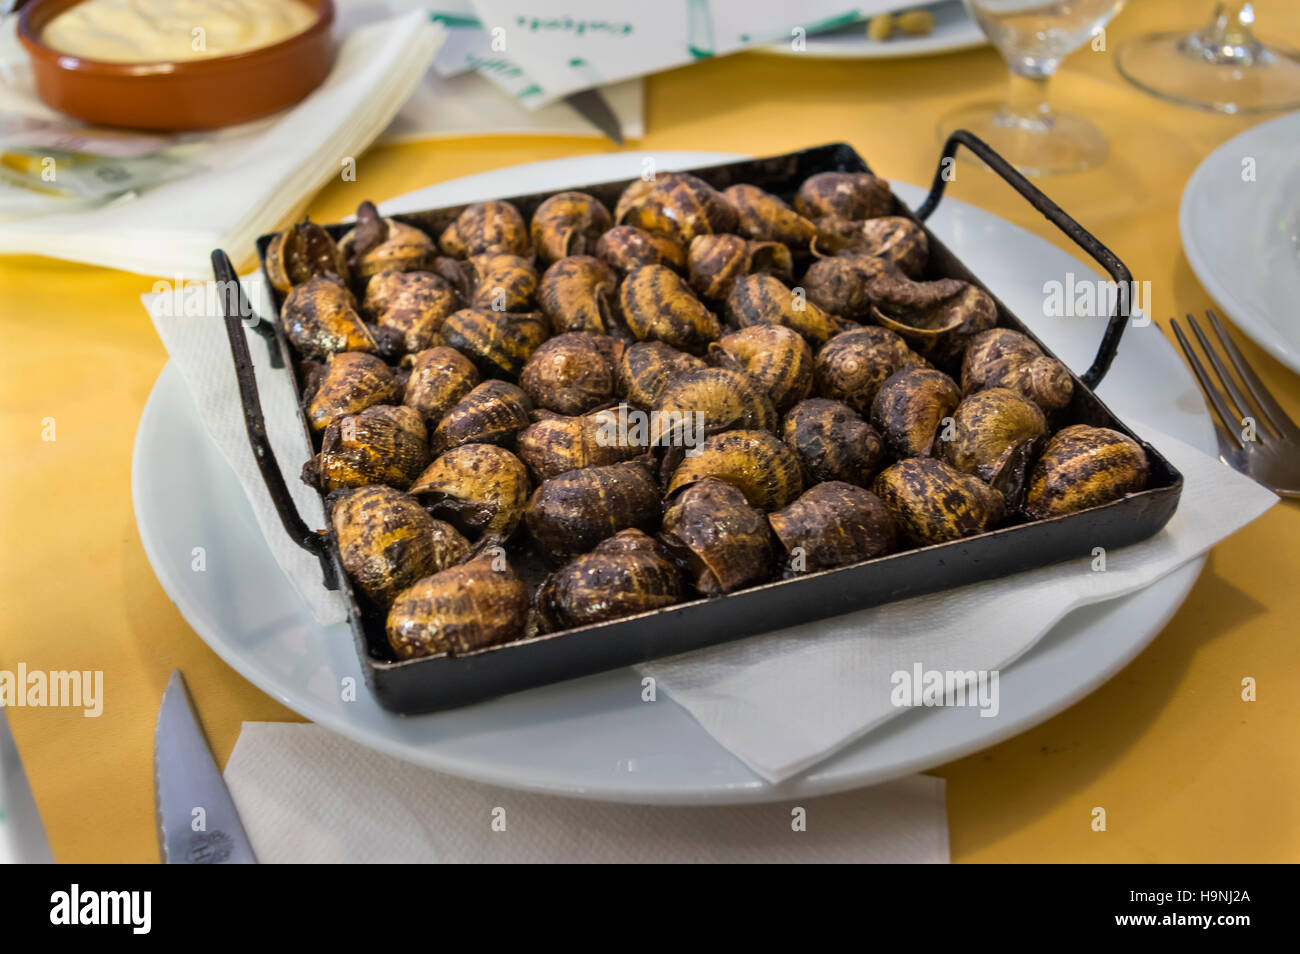 Catalan traditional dish 'caragols al forn' (escargots baked in the oven) served in a restaurant in Barcelona, Catalonia, Spain. Stock Photo